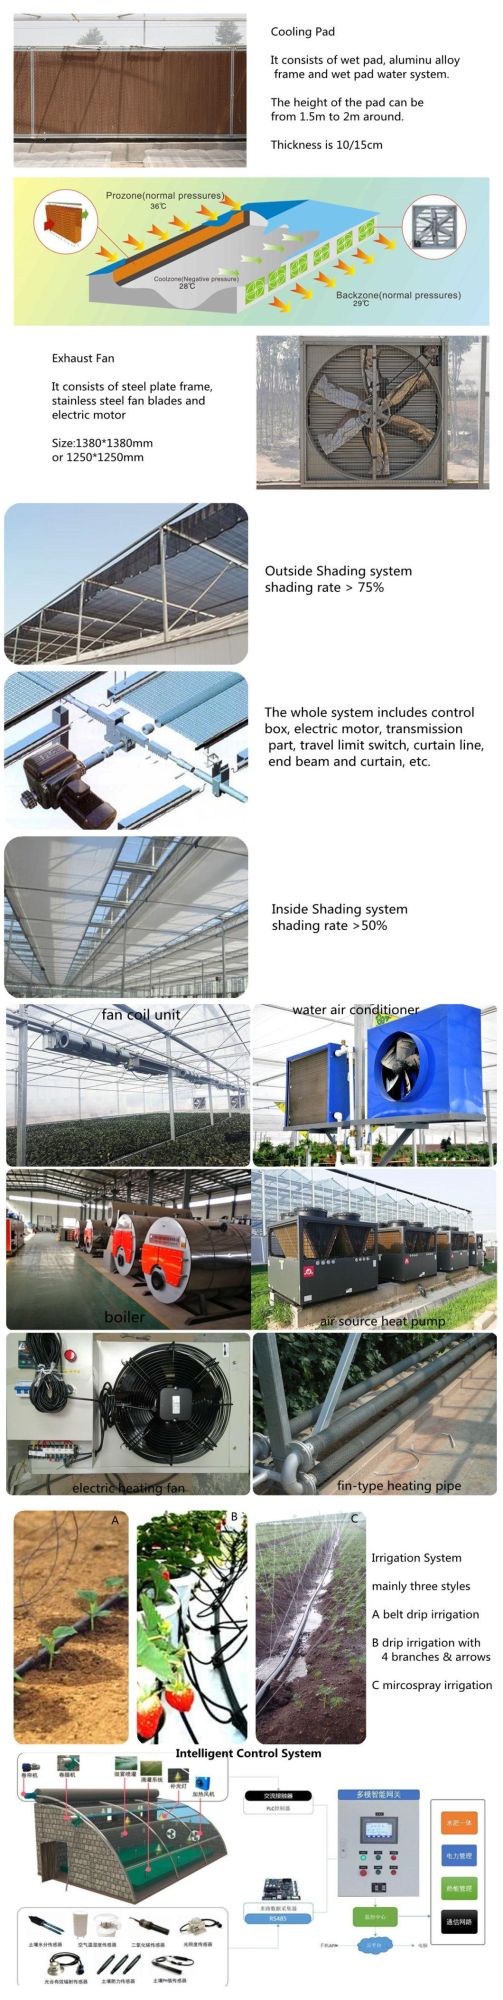 220V/50Hz/Single Phase Advanced Big Volume Sowing Device Customized Pneumatic Sowing Machine Used Inside Greenhouse for Seedling Tray Automatic Sowing